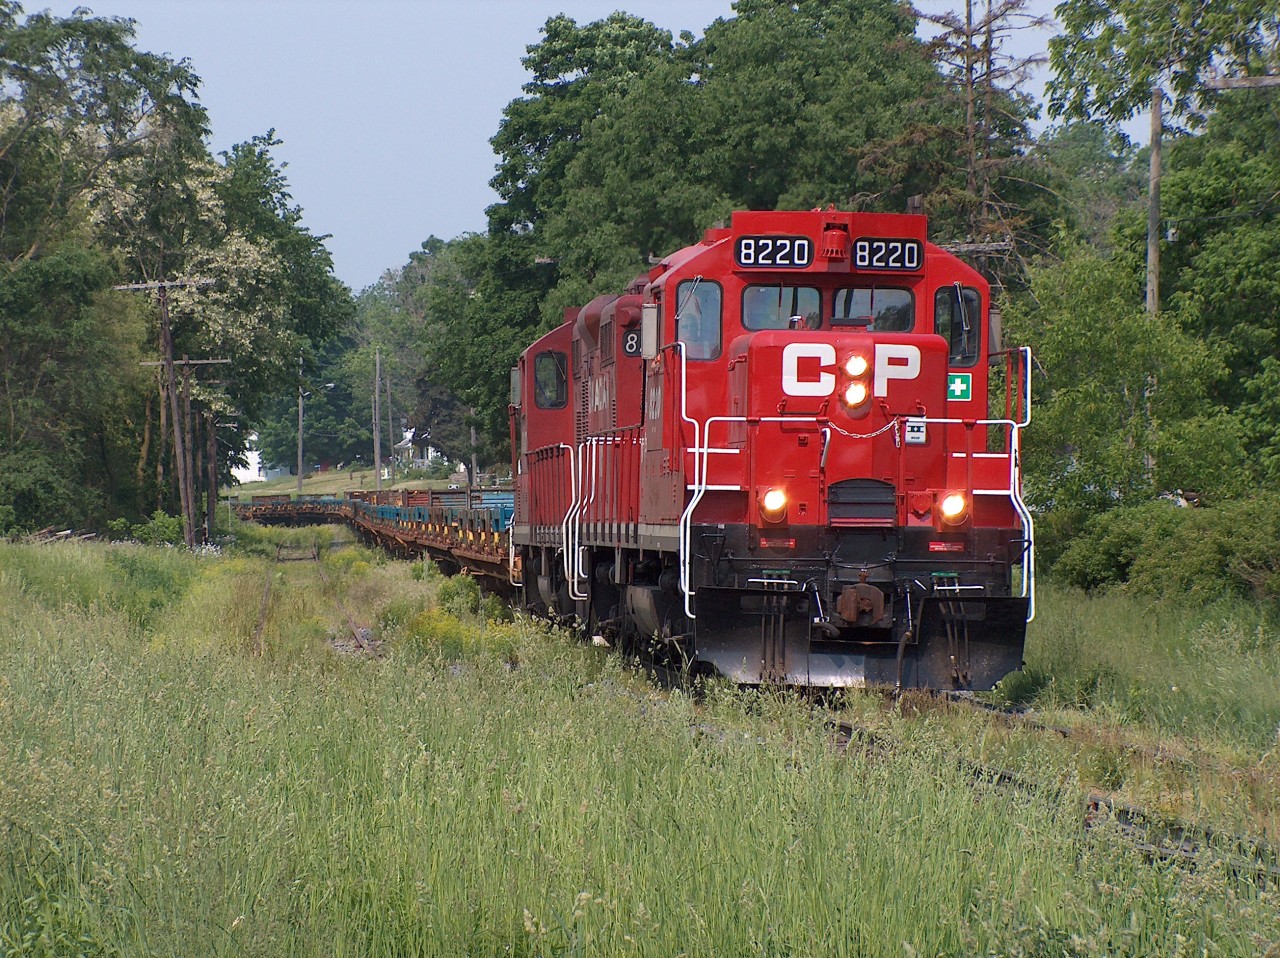 On a hot afternoon in June 2007, the westbound CP frame train heads towards St. Thomas with empties. I believe its counterpart was CP 142 with loads that usually traversed the CP lines in the morning. From my knowledge, OSR did not acquire this line yet (at the time of the photo) so perhaps CP 141/142 were the only trains on the St. Thomas sub at that time (perhaps one or two other locals?). Currently, this portion of the line at Beachville appears to be a lot more active than back then; there's usually train cars in the siding and I don't think there's as much overgrowth! The train looks like its trundling along a seldom used forgotten spur. Which reminds me, the GEXR Waterloo spur was also a lot overgrown at one point (i.e. 1995) compared to its current state. It's as if these lines were on the verge of abandonment and got saved!